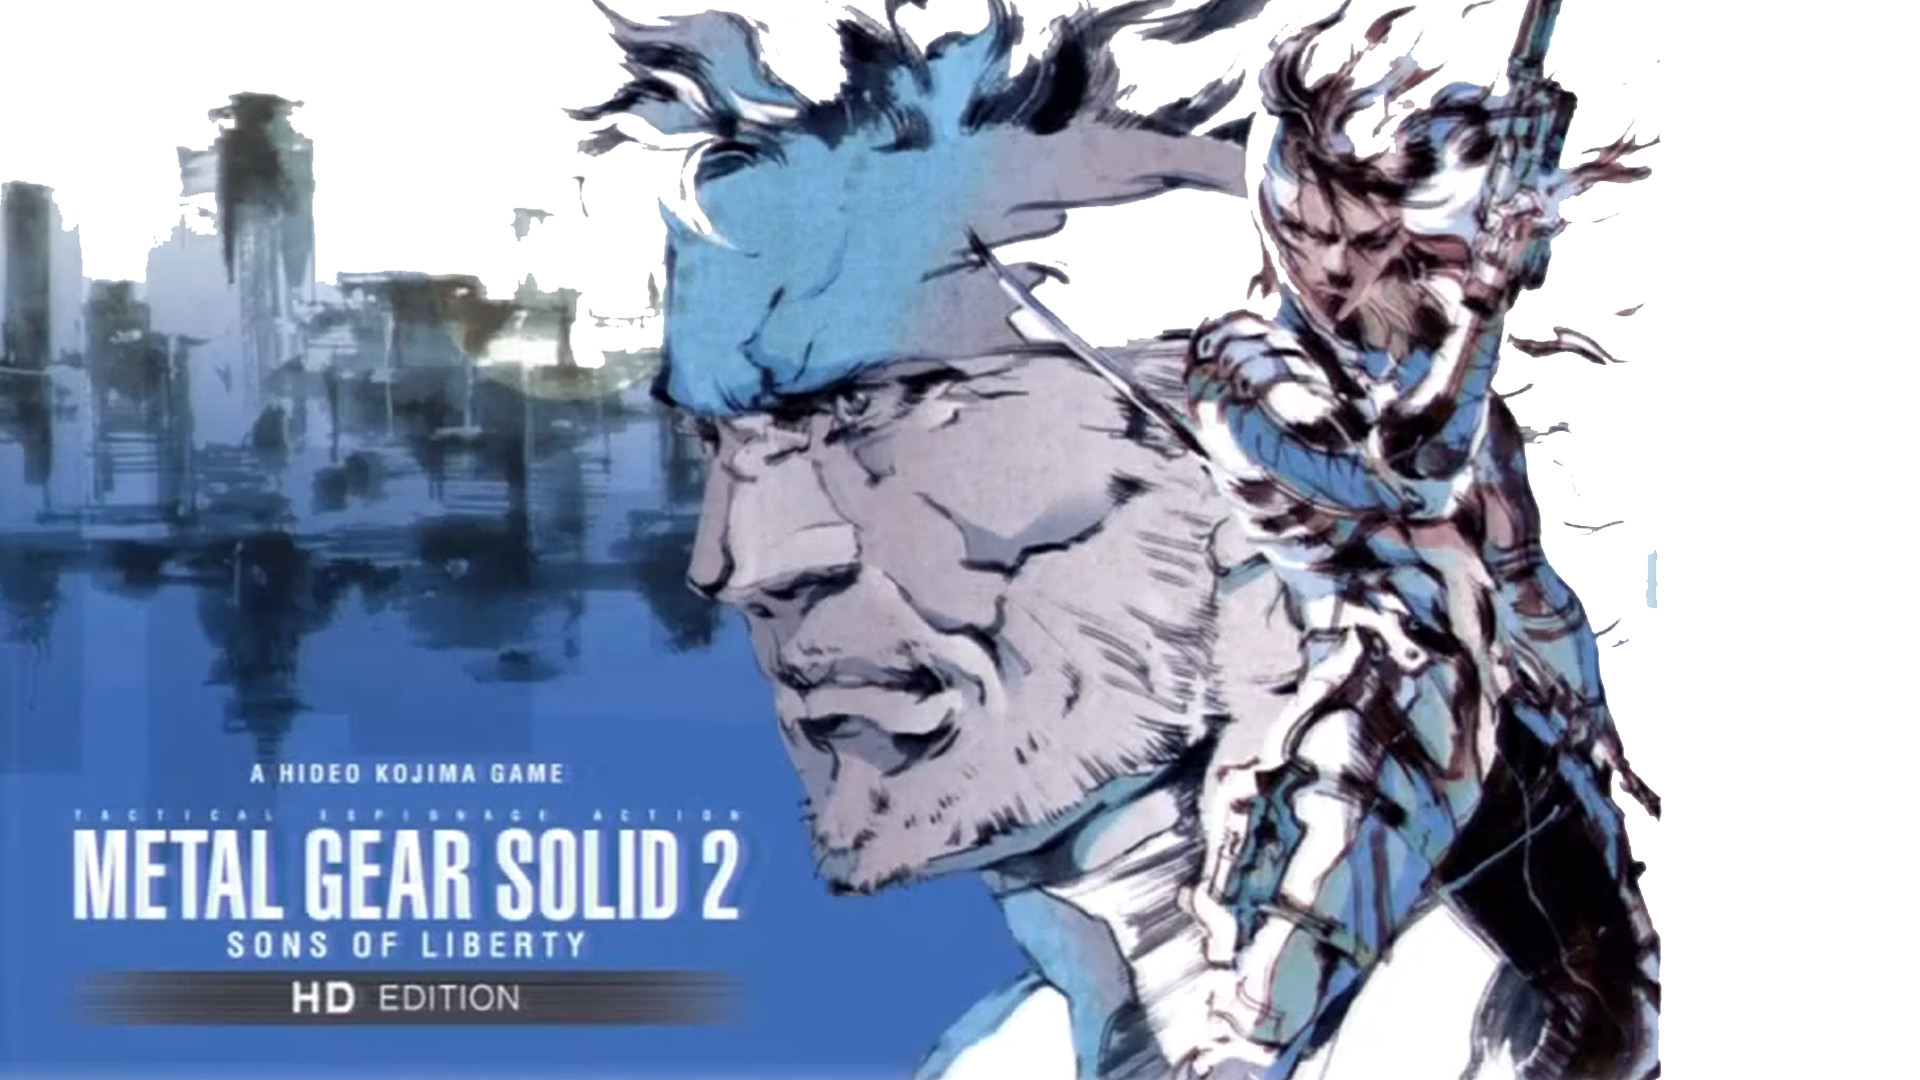 1920x1080 Metal Gear Solid 2 HD EDITION (Unreleased) by Outer-Heaven1974 on .